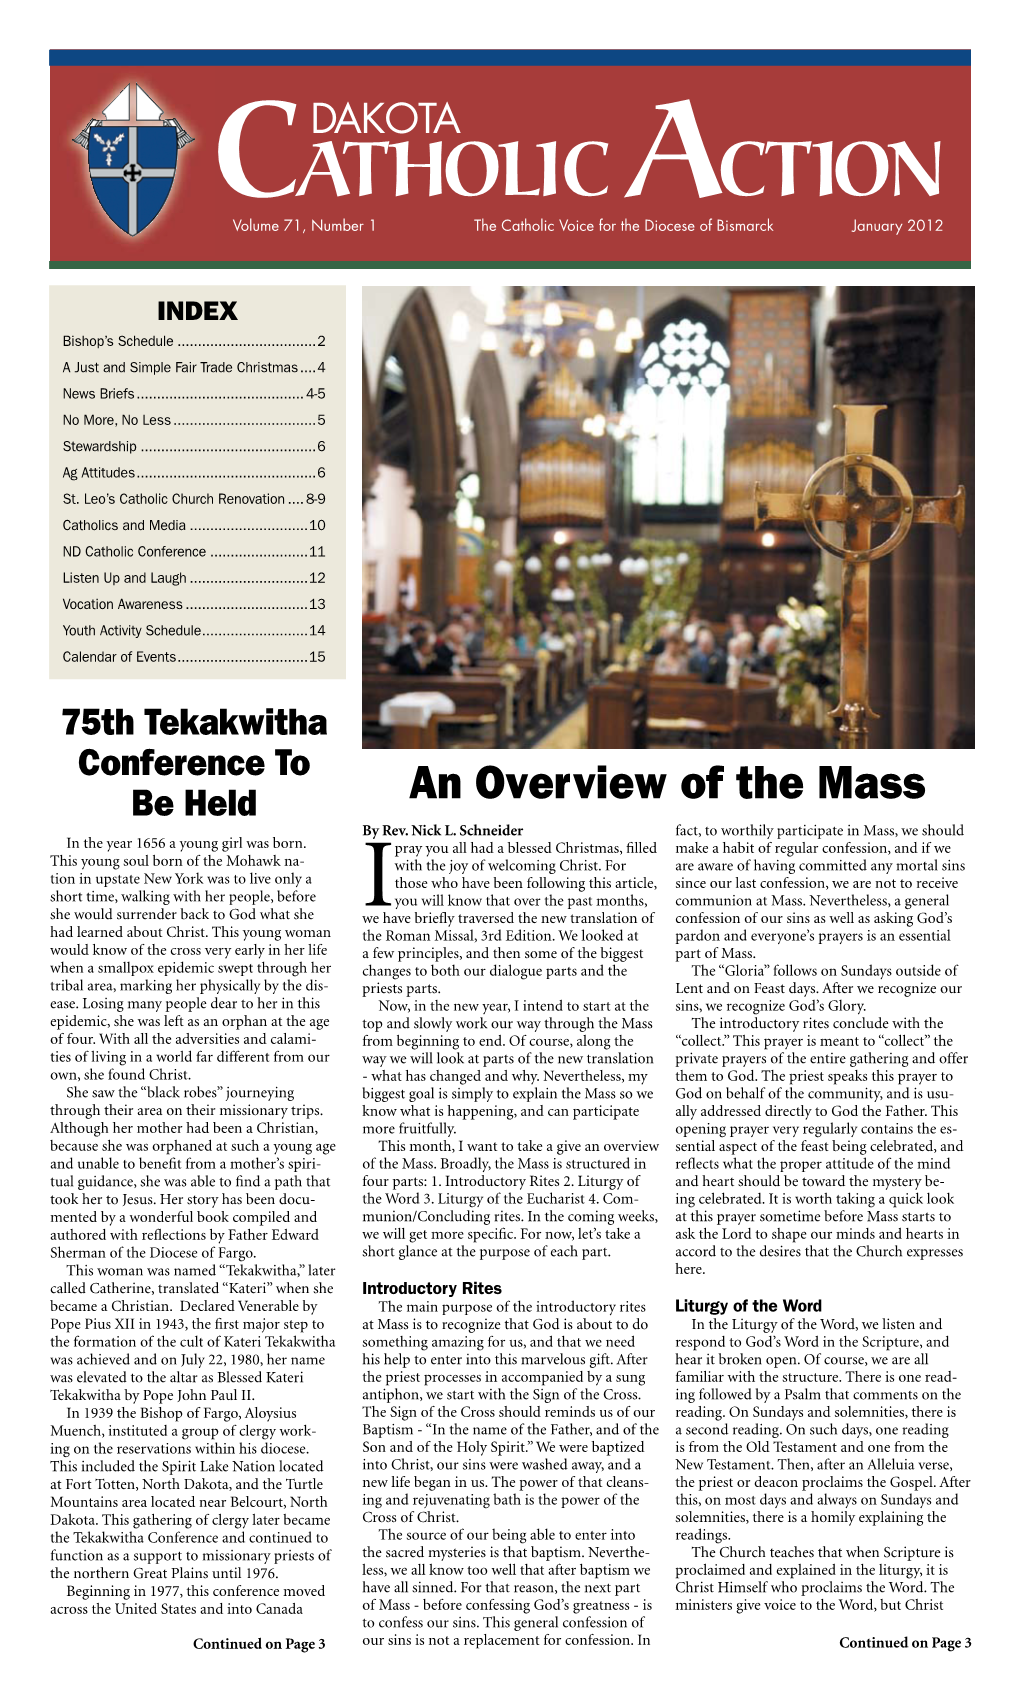 CATHOLIC ACTION Volume 71, Number 1 the Catholic Voice for the Diocese of Bismarck January 2012